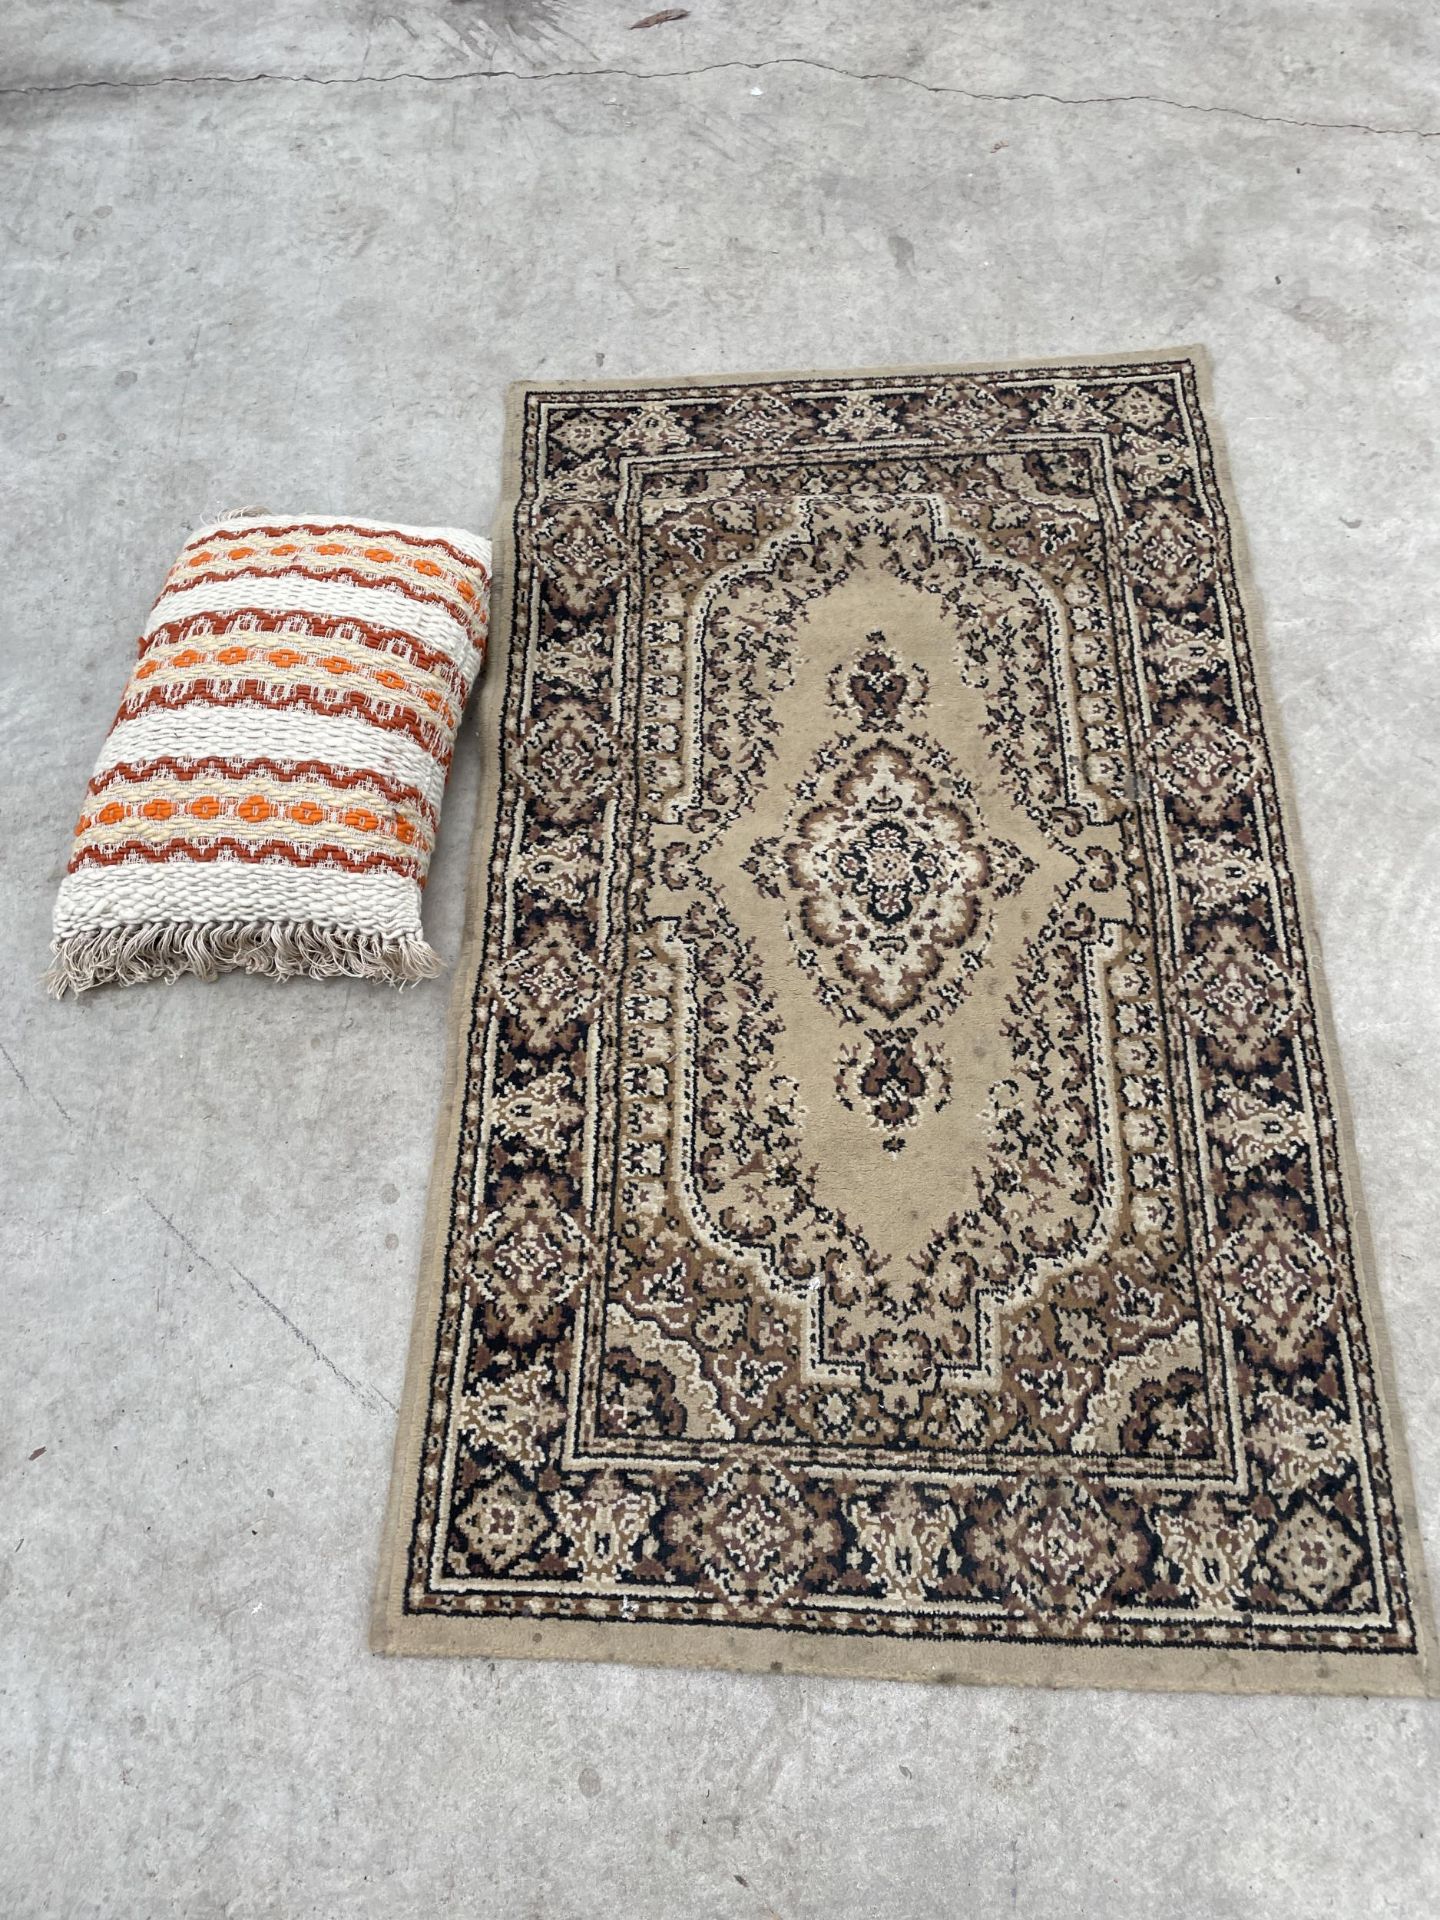 A SMALL CREAM PATTERNED RUG AND A CUSHION